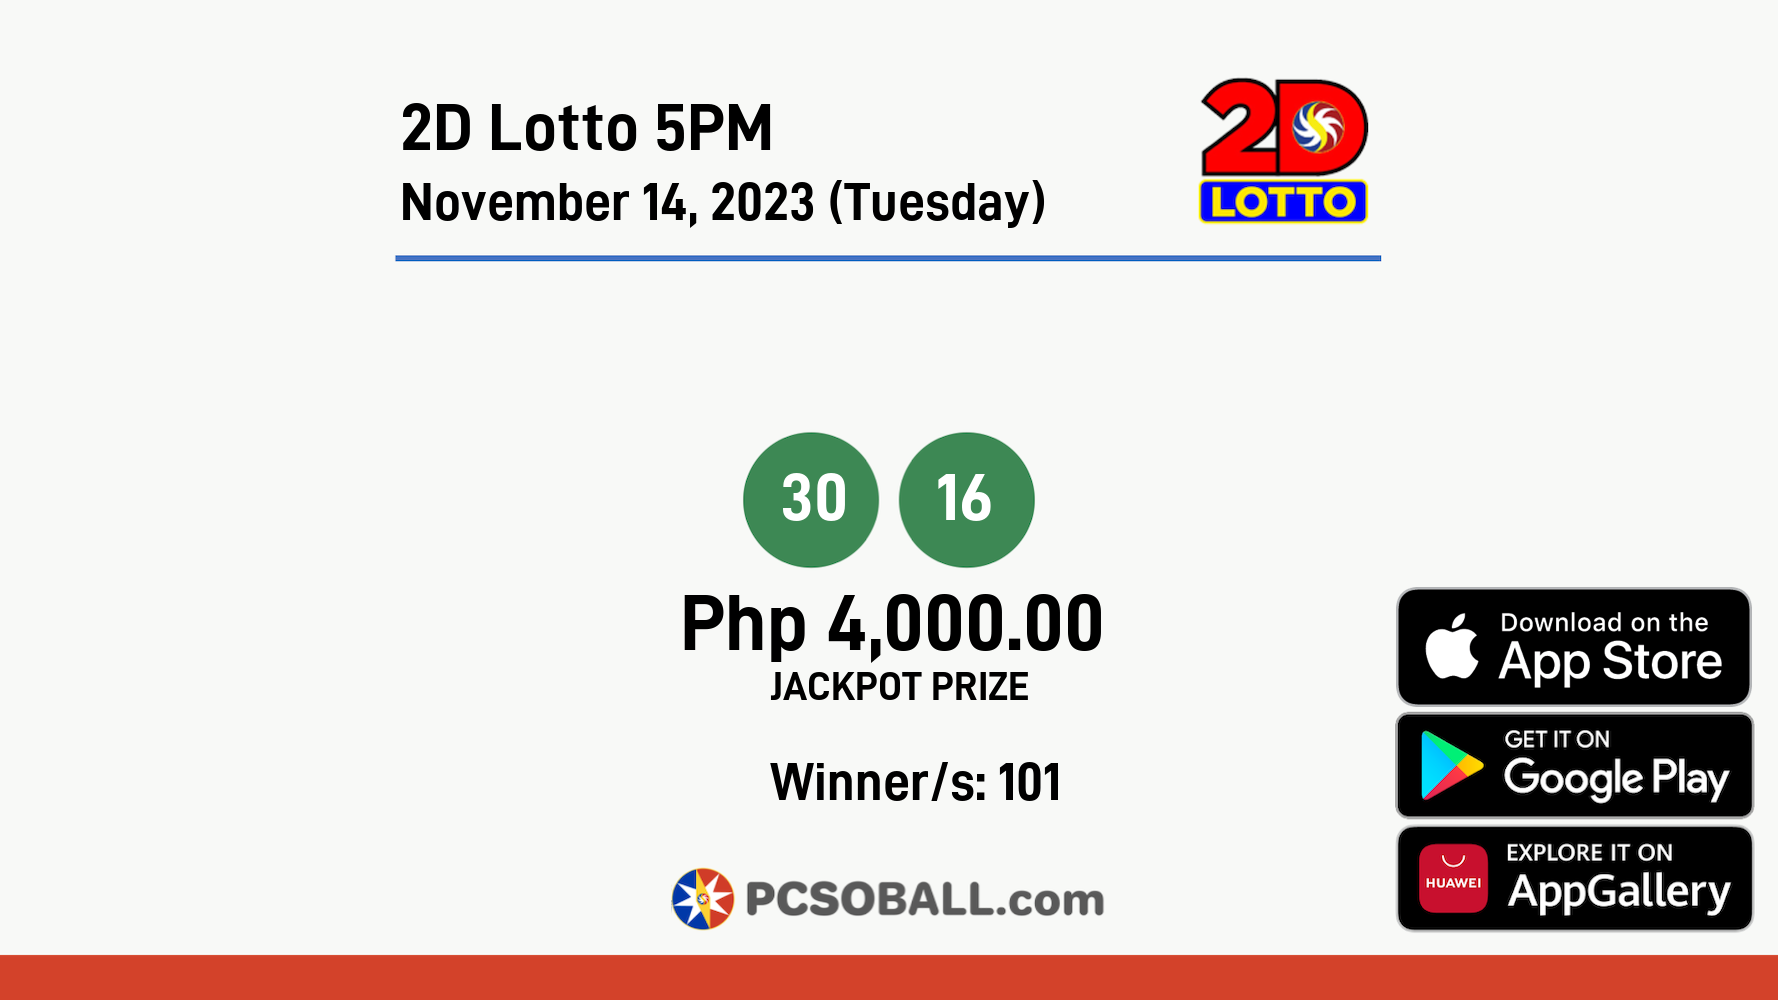 2D Lotto 5PM November 14, 2023 (Tuesday) Result